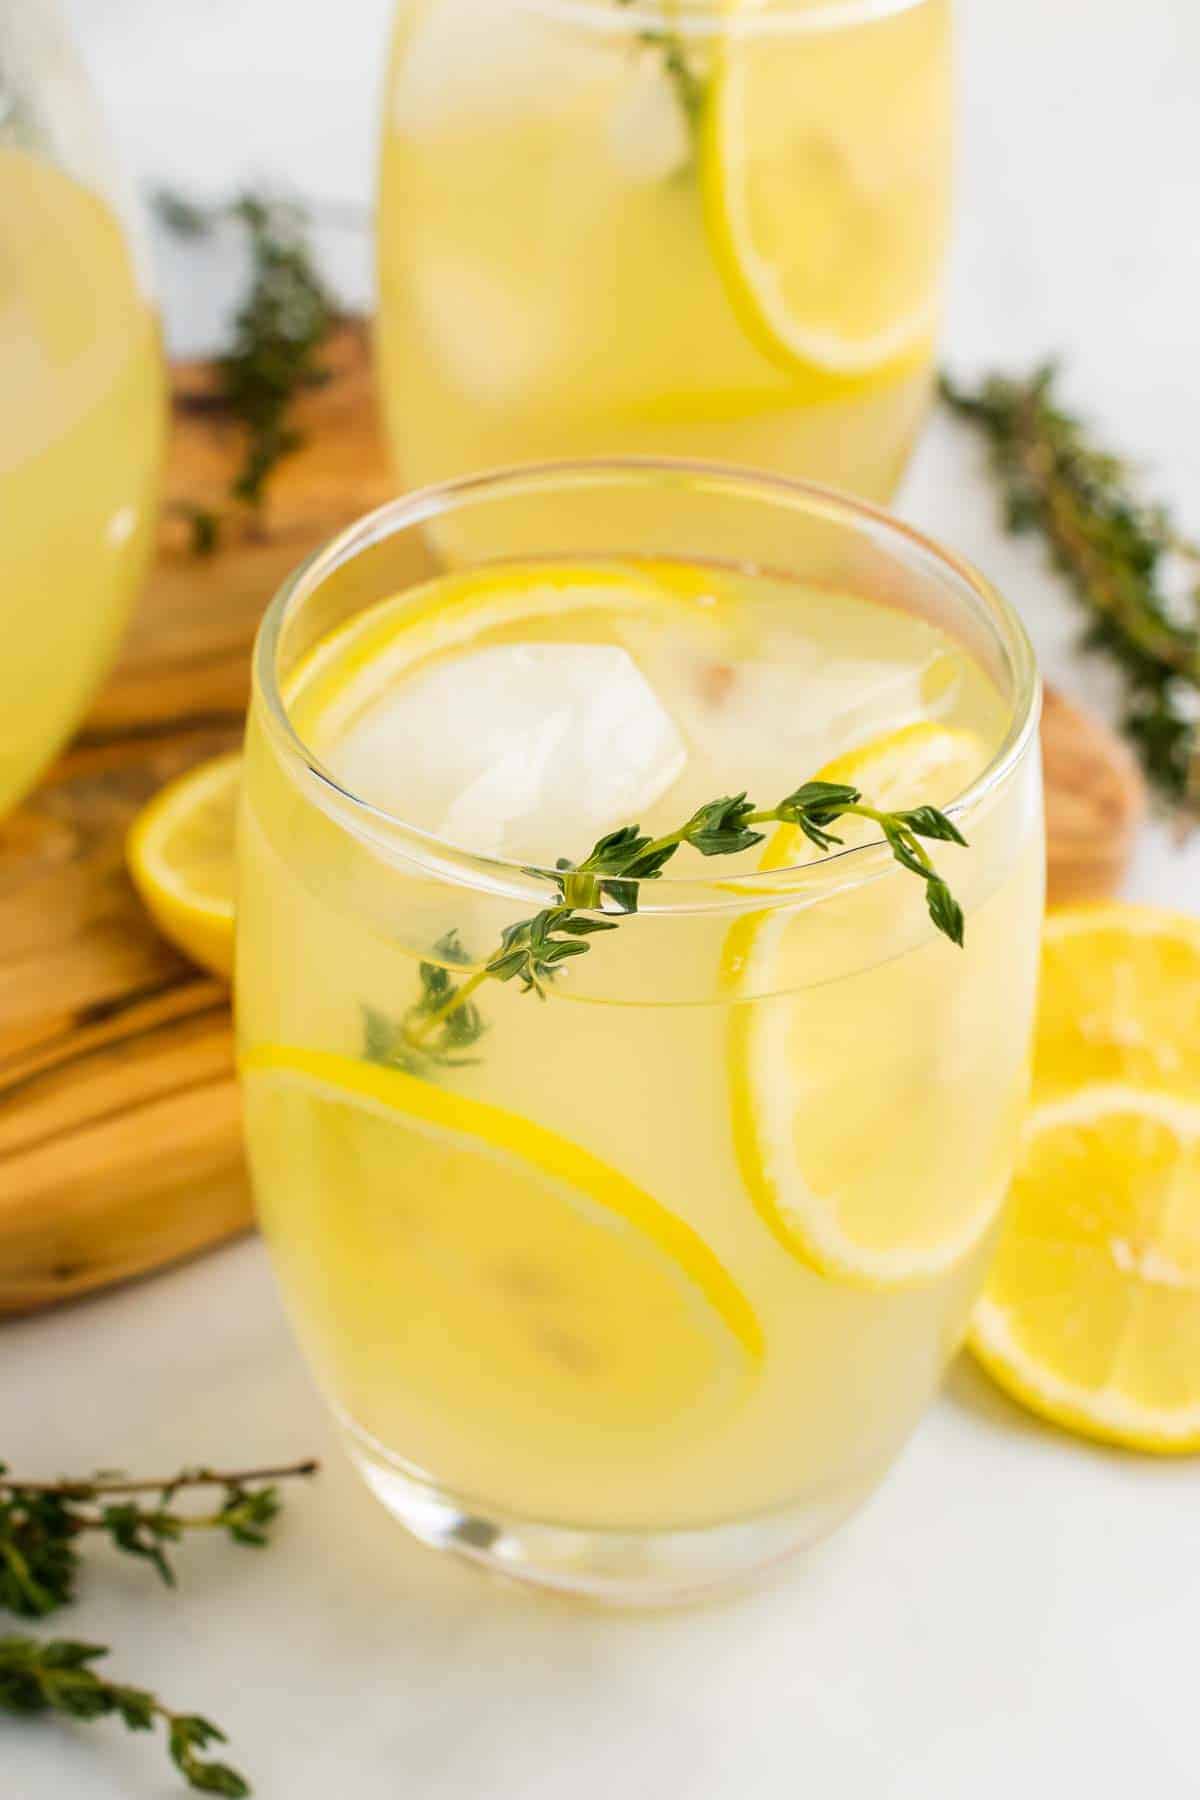 Glass of Sugar-Free Lemonade with Thyme on table